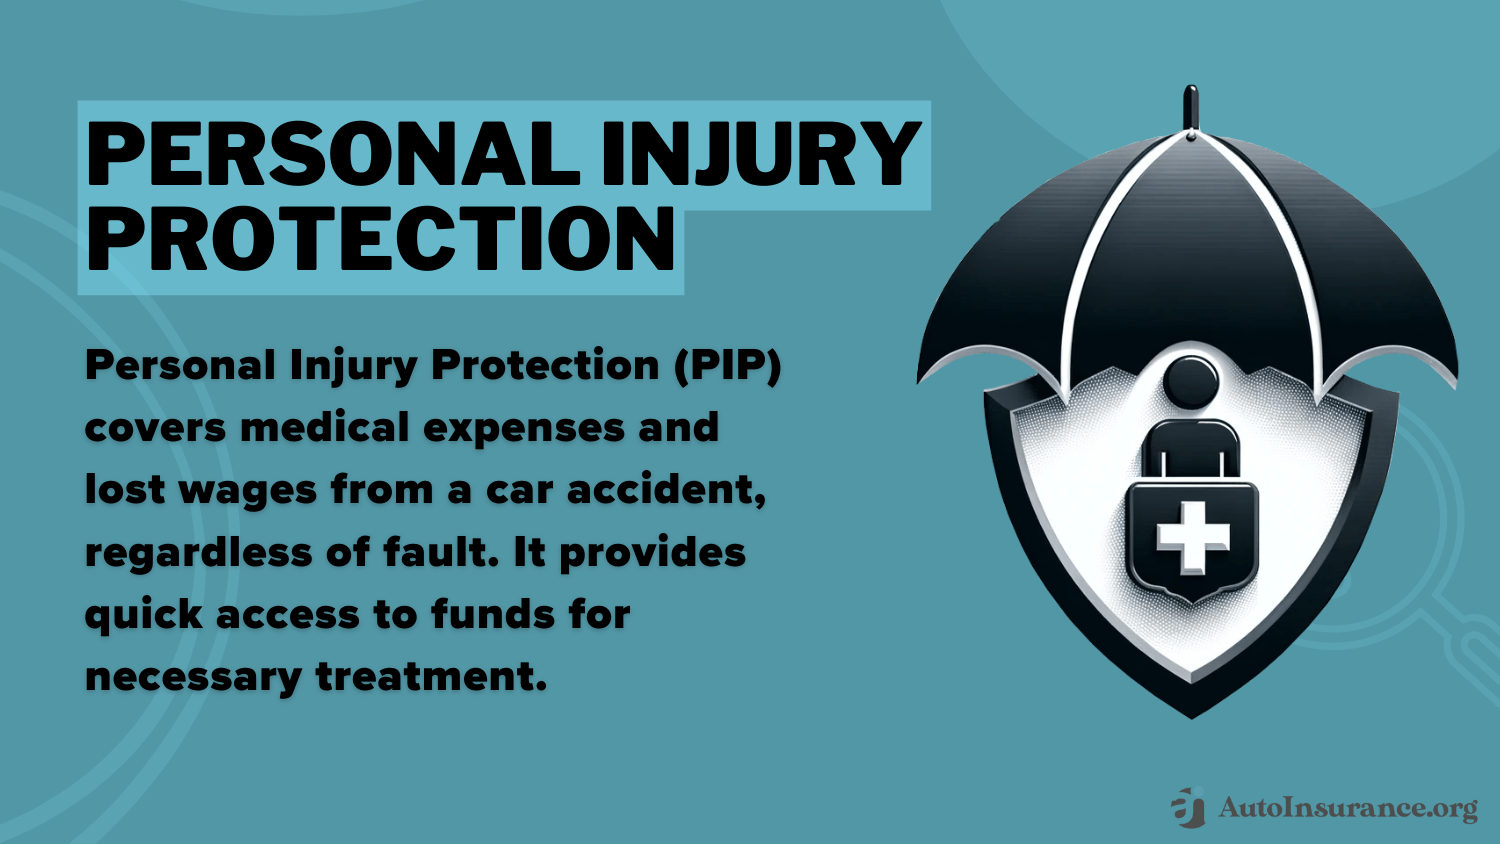 Personal Injury Protection Definition Card: Does auto insurance cover hitting a pole?